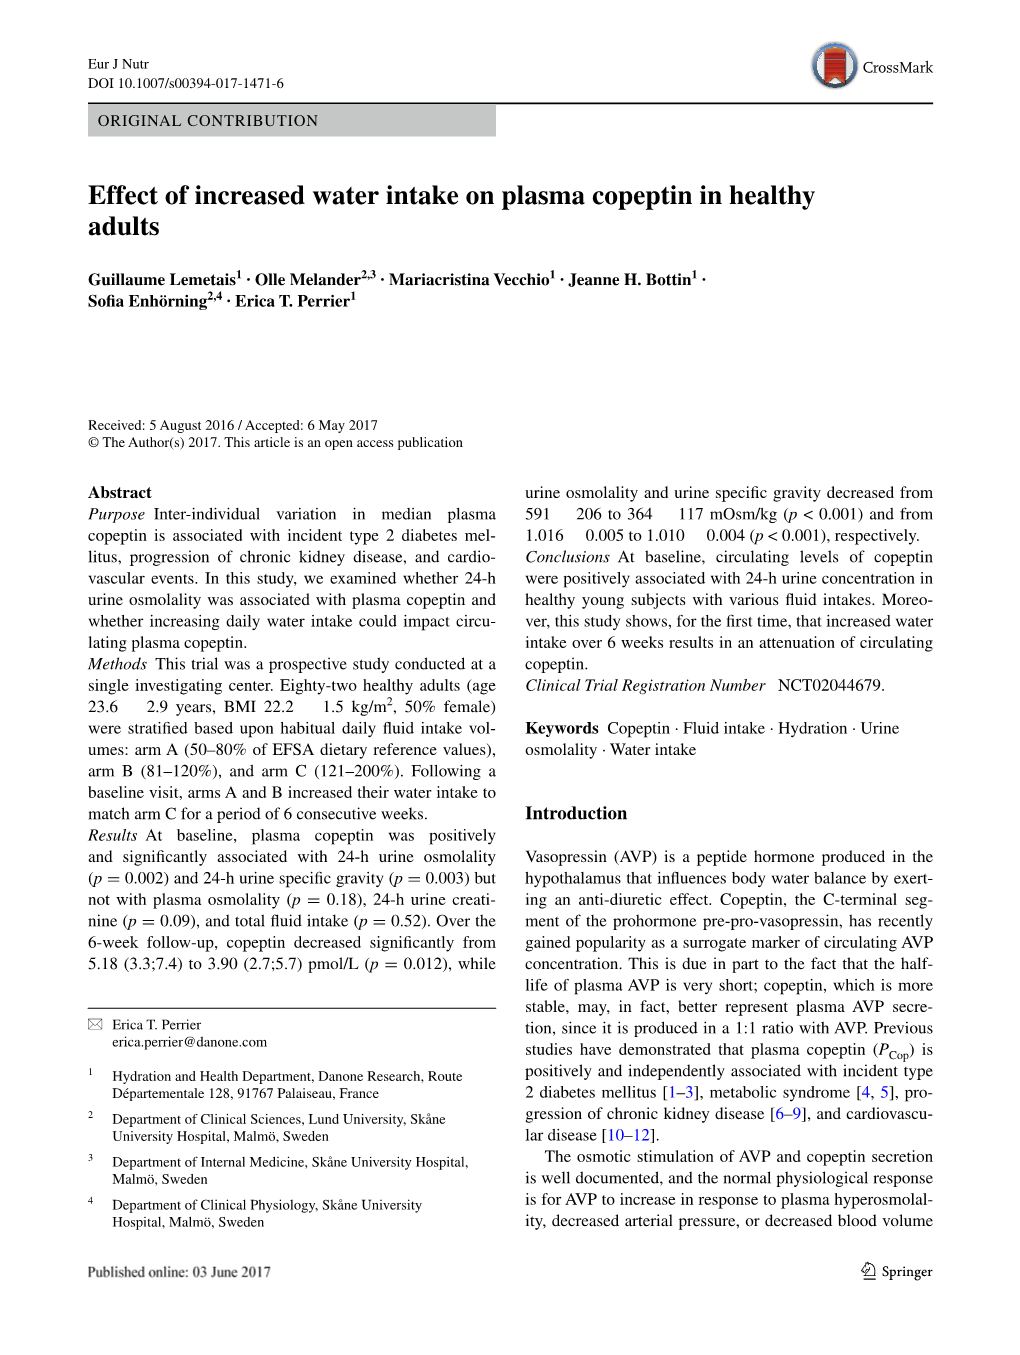 Effect of Increased Water Intake on Plasma Copeptin in Healthy Adults